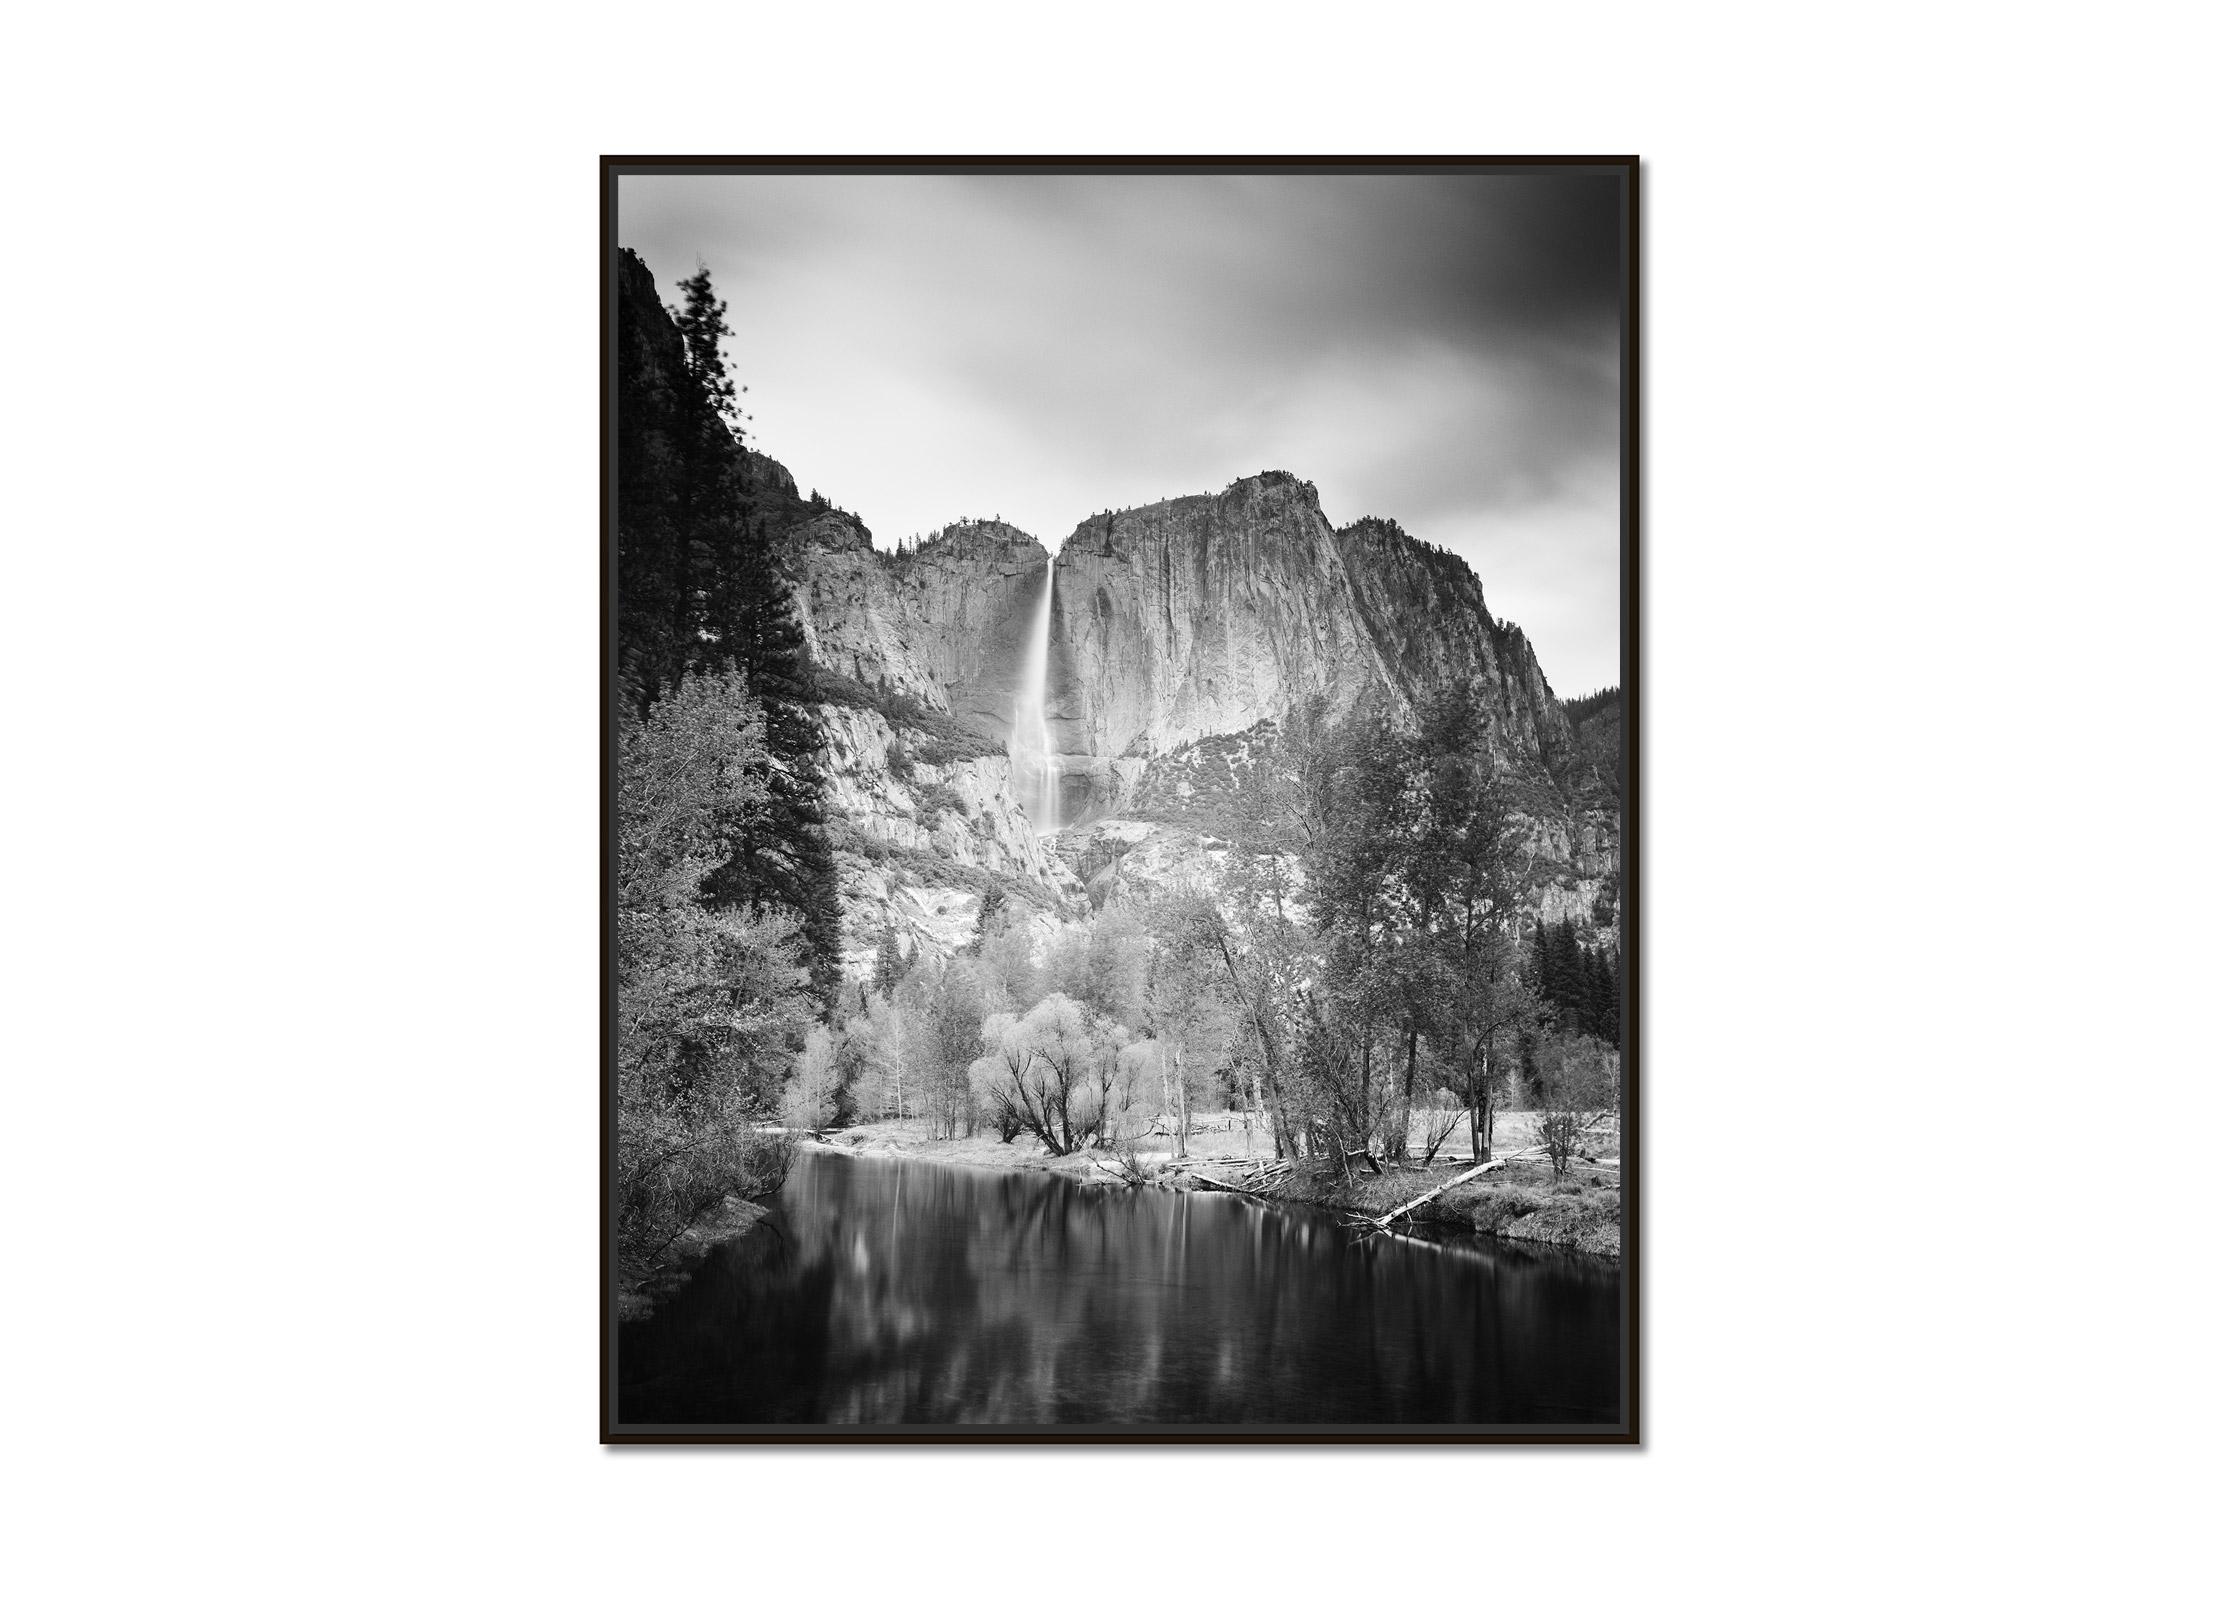 Upper Yosemite Falls, California, USA, black and white photography, landscape - Photograph by Gerald Berghammer, Ina Forstinger